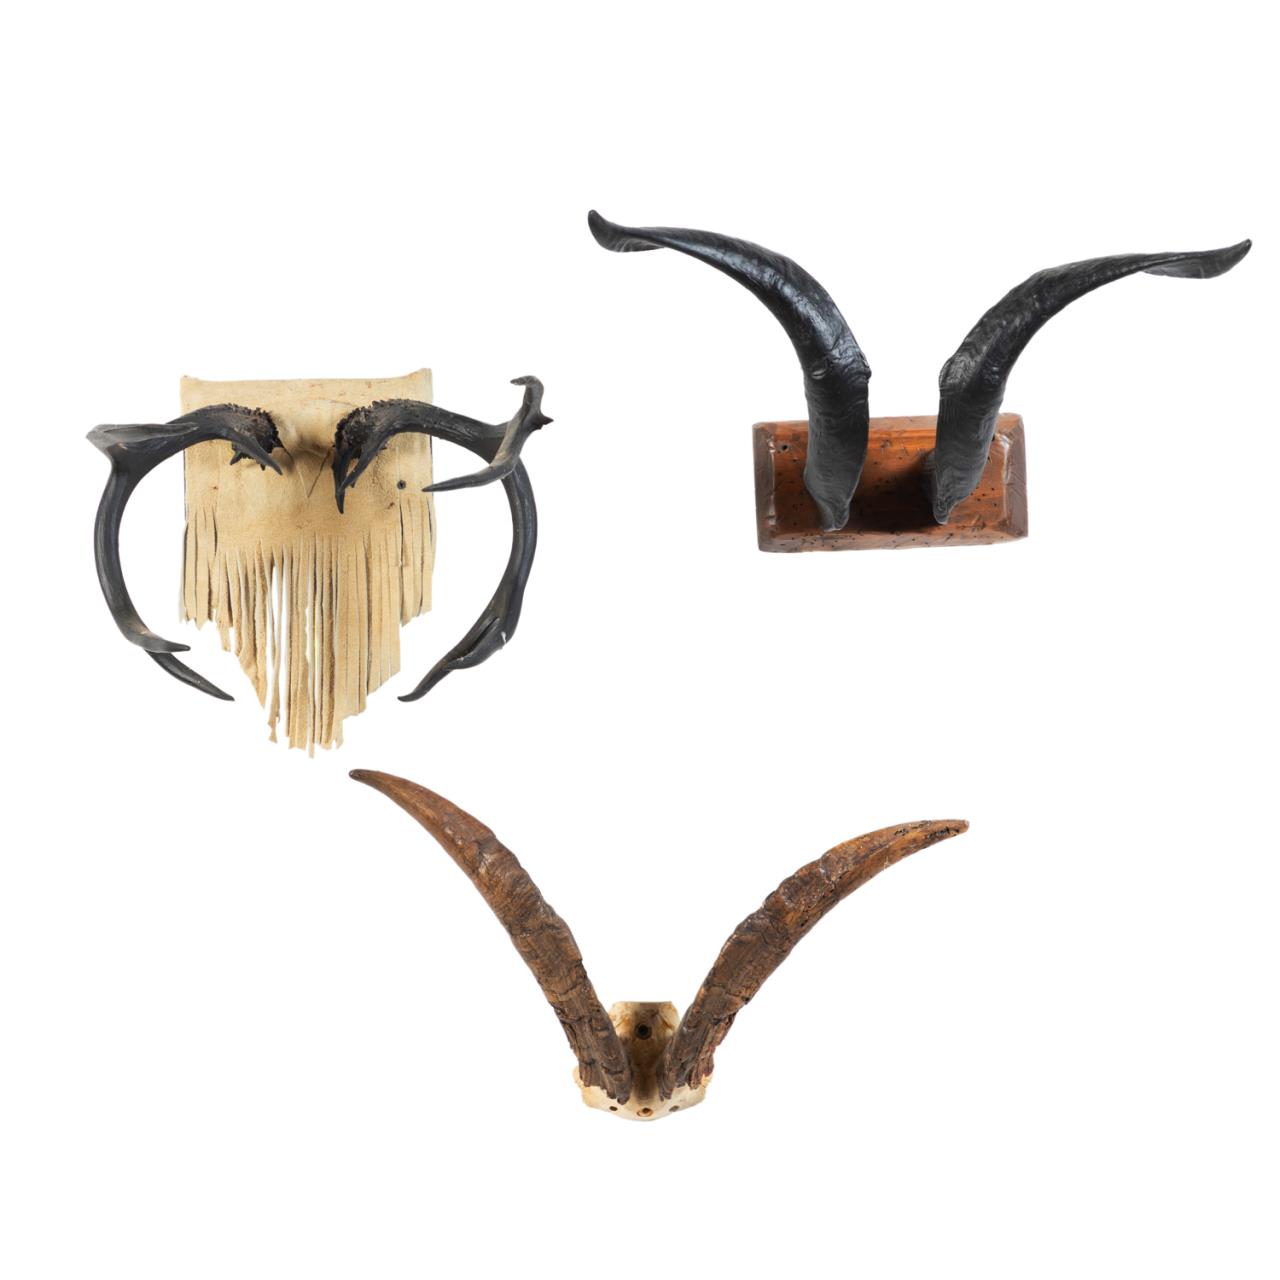 THREE MOUNTED ANIMAL HORN AND ANTLER